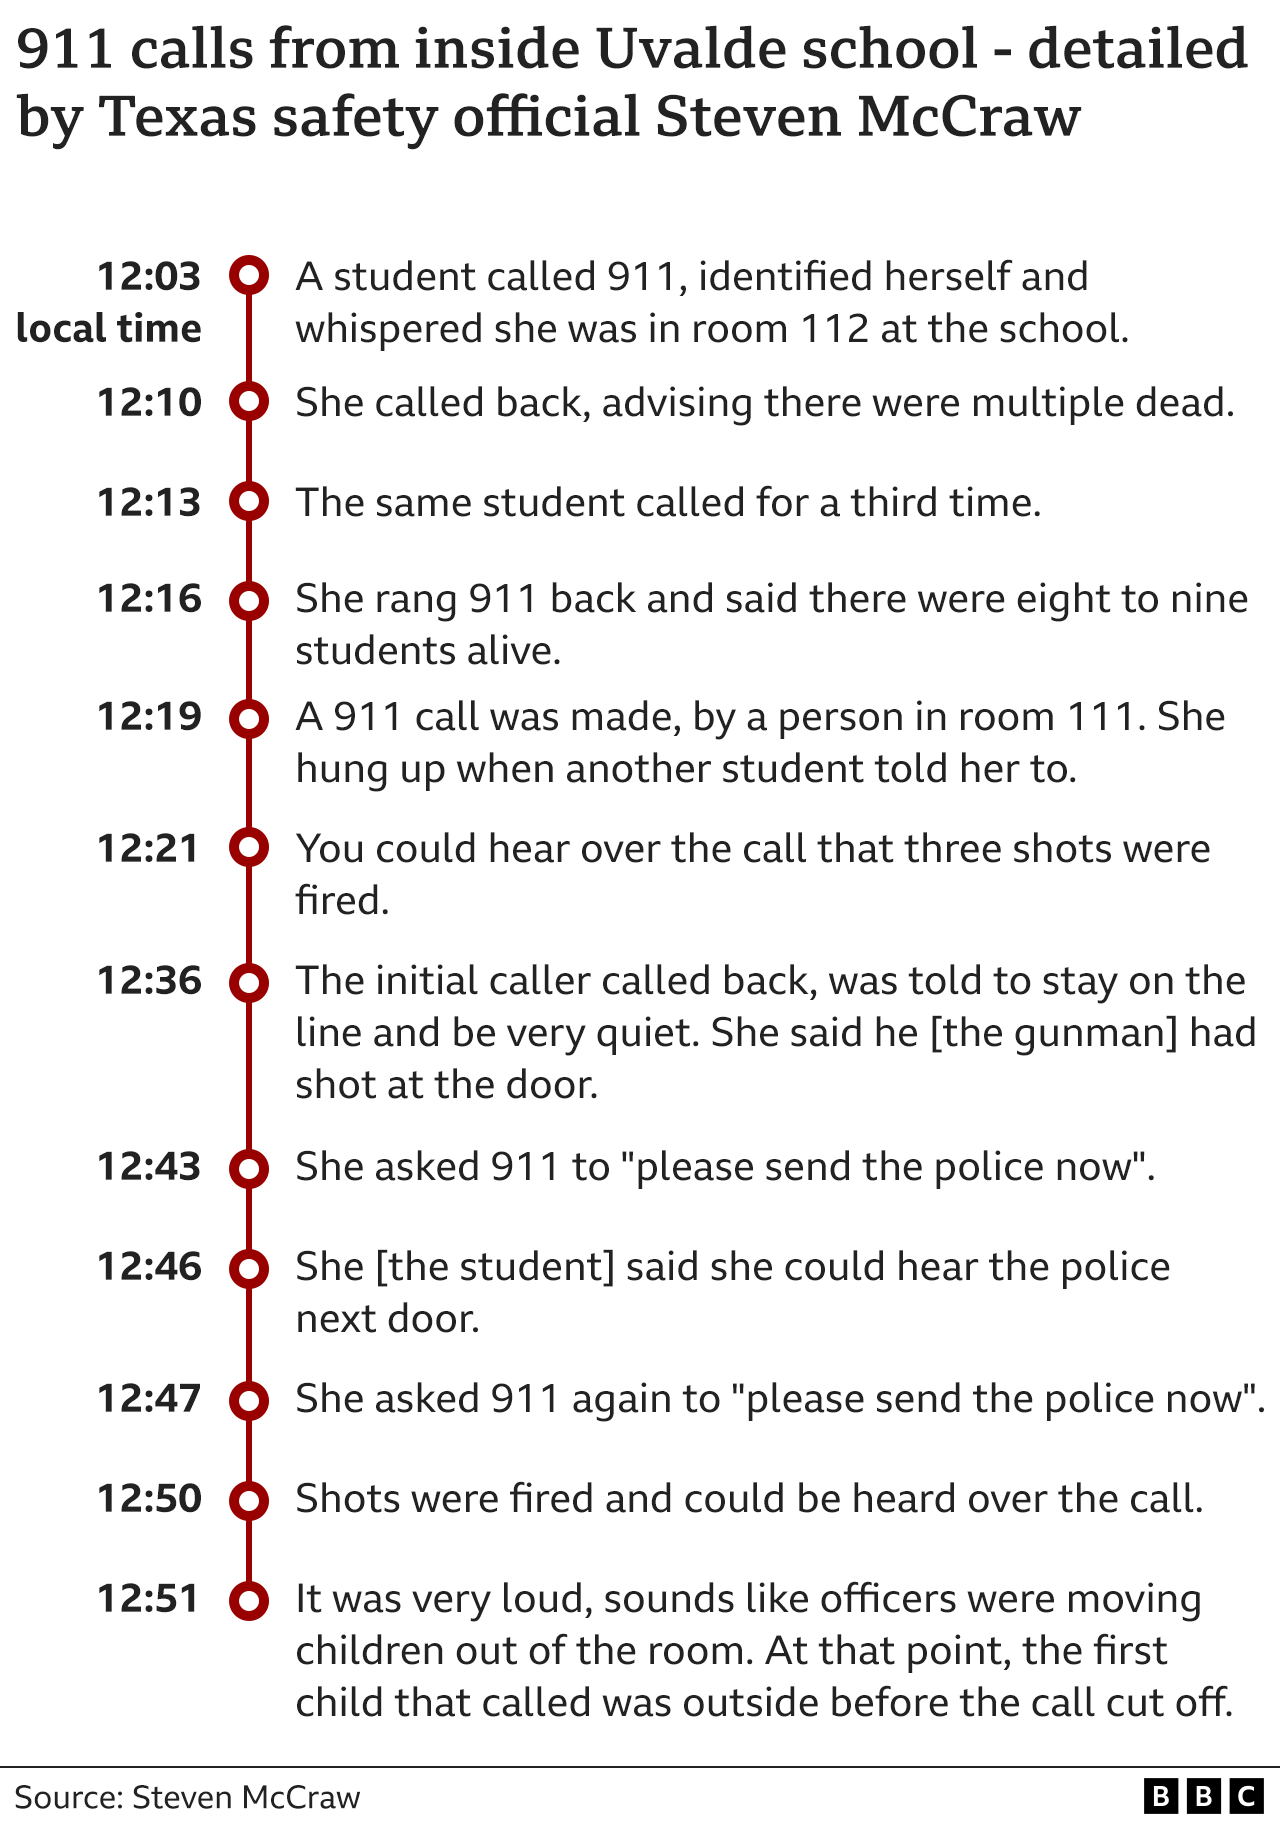 A BBC graphic showing a timeline of calls to police